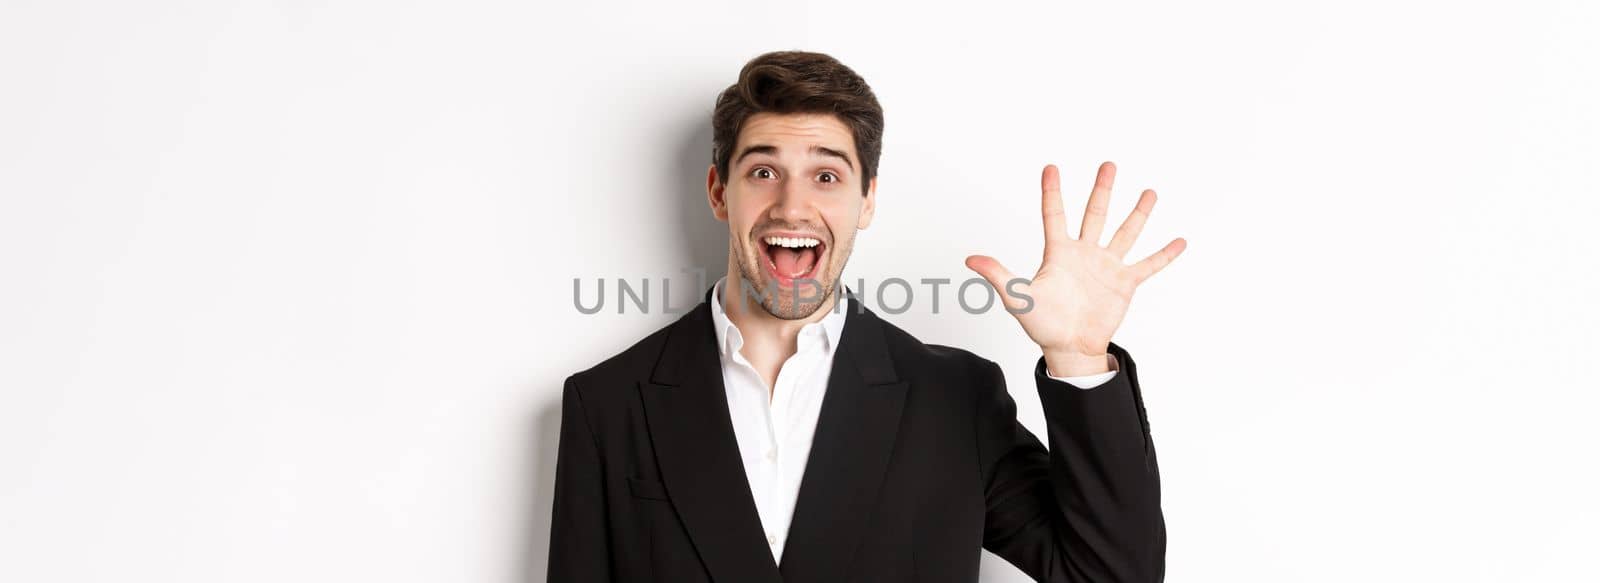 Close-up of handsome businessman in black suit, smiling amazed, showing number five, standing over white background.